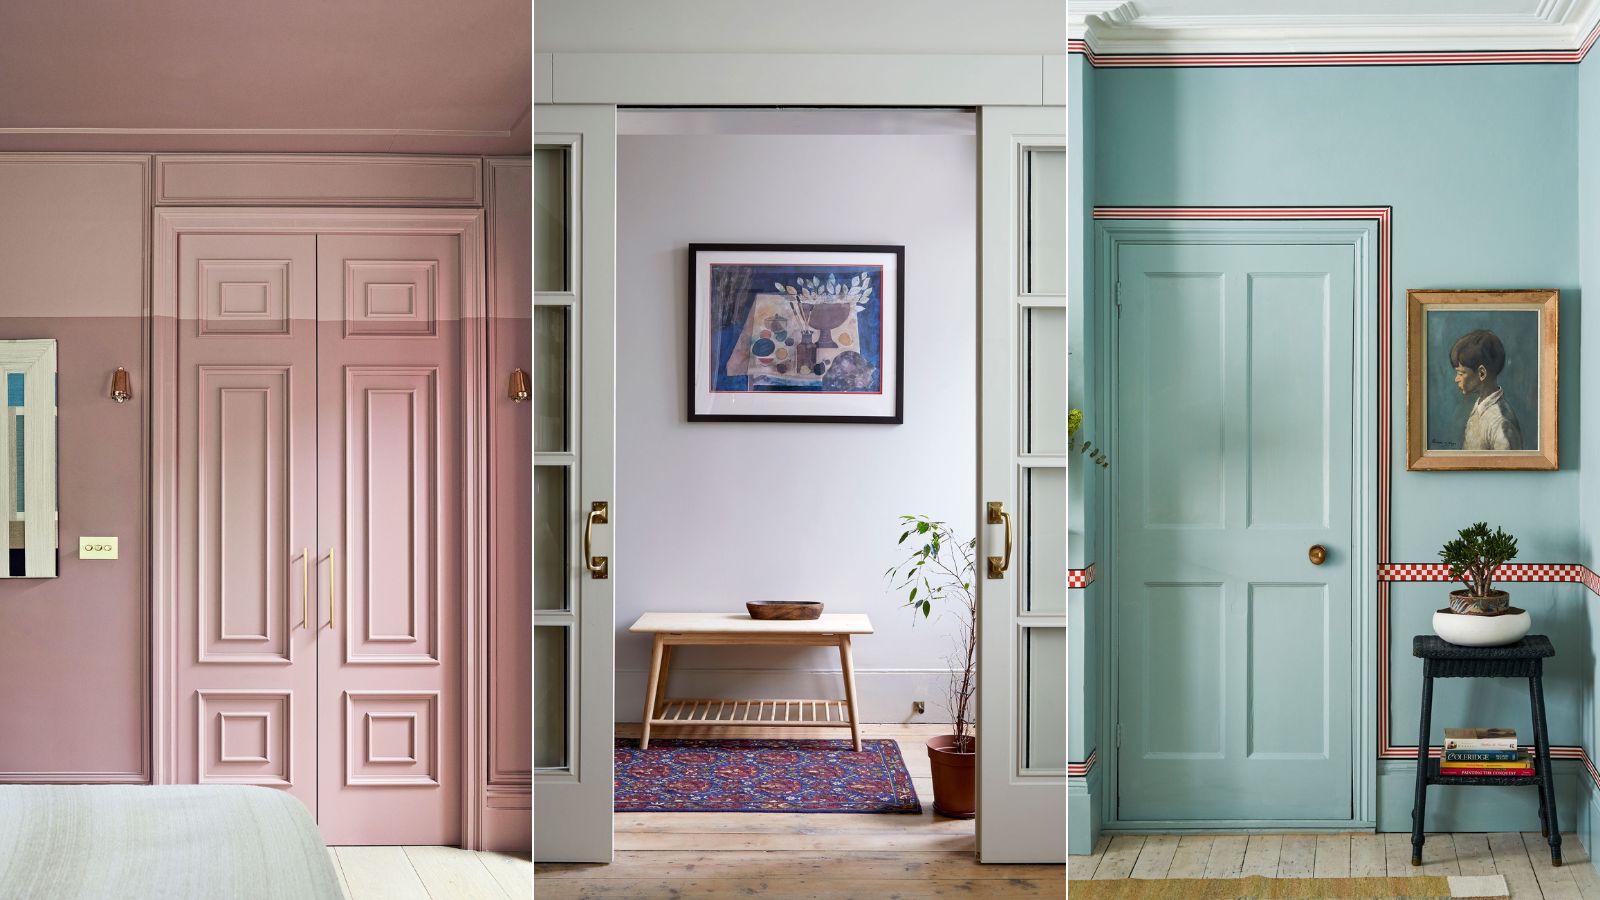 Should doors be painted the same color as walls? |